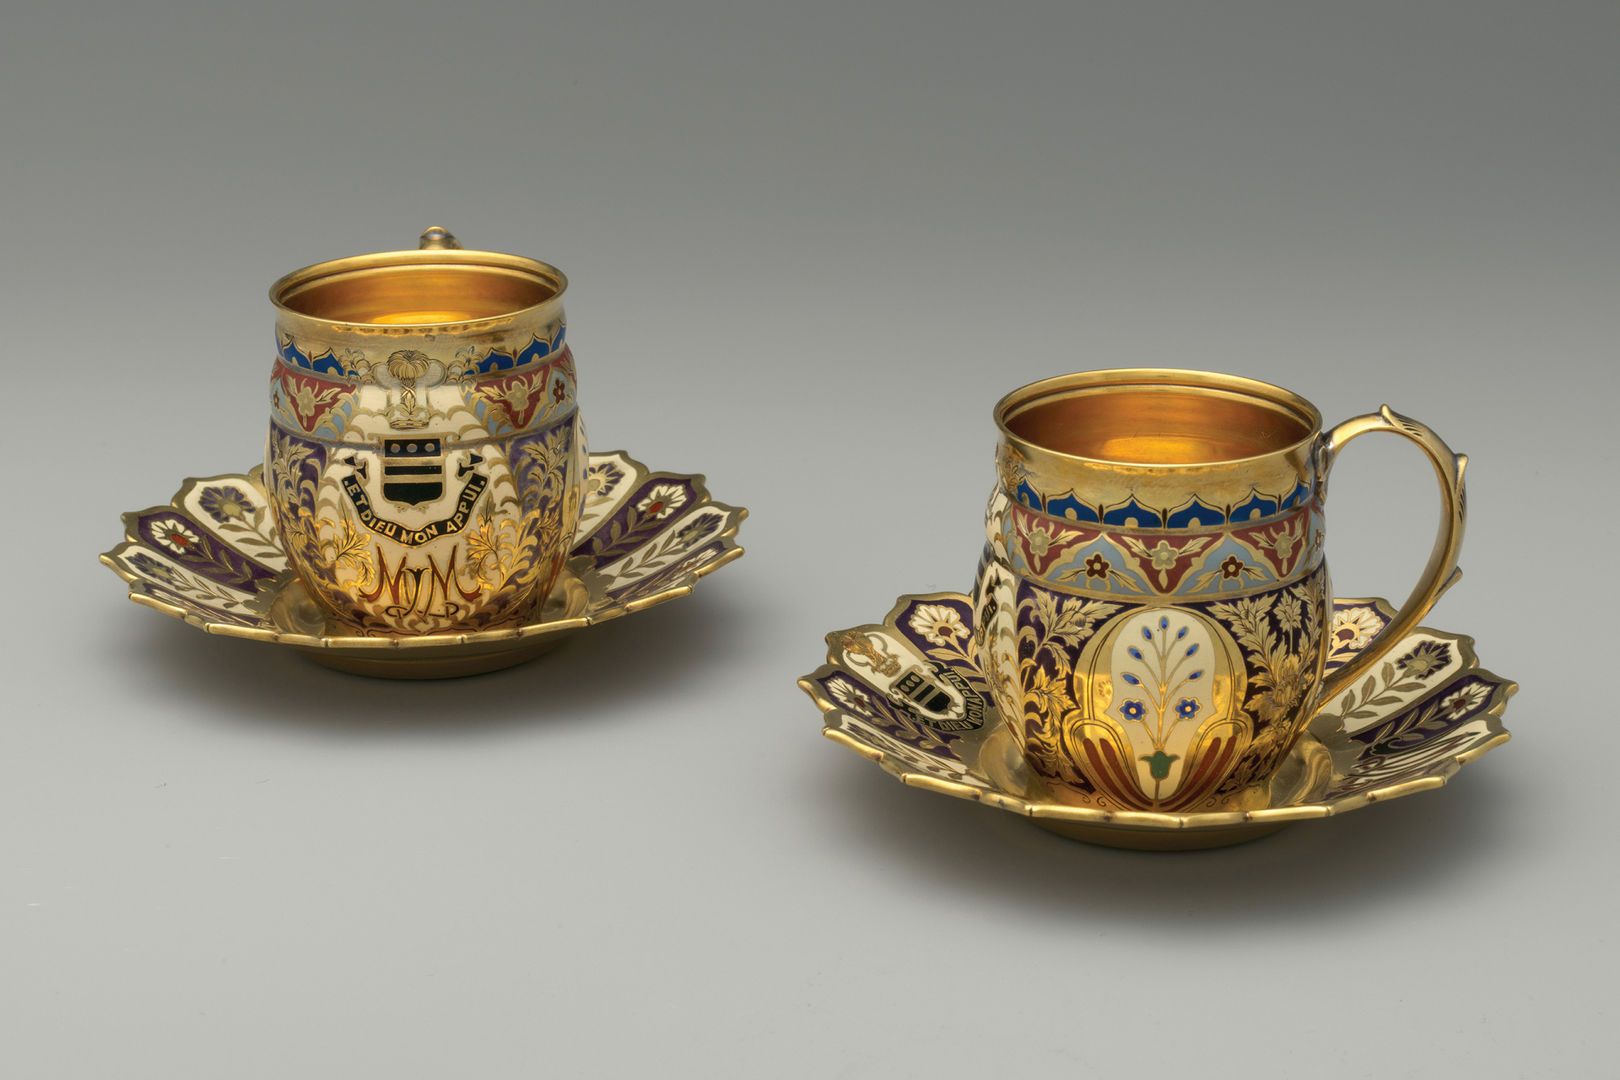 A pair of dazzling gilded and enameled cups and saucers adorned with floral designs, a coat of arms, and monogram